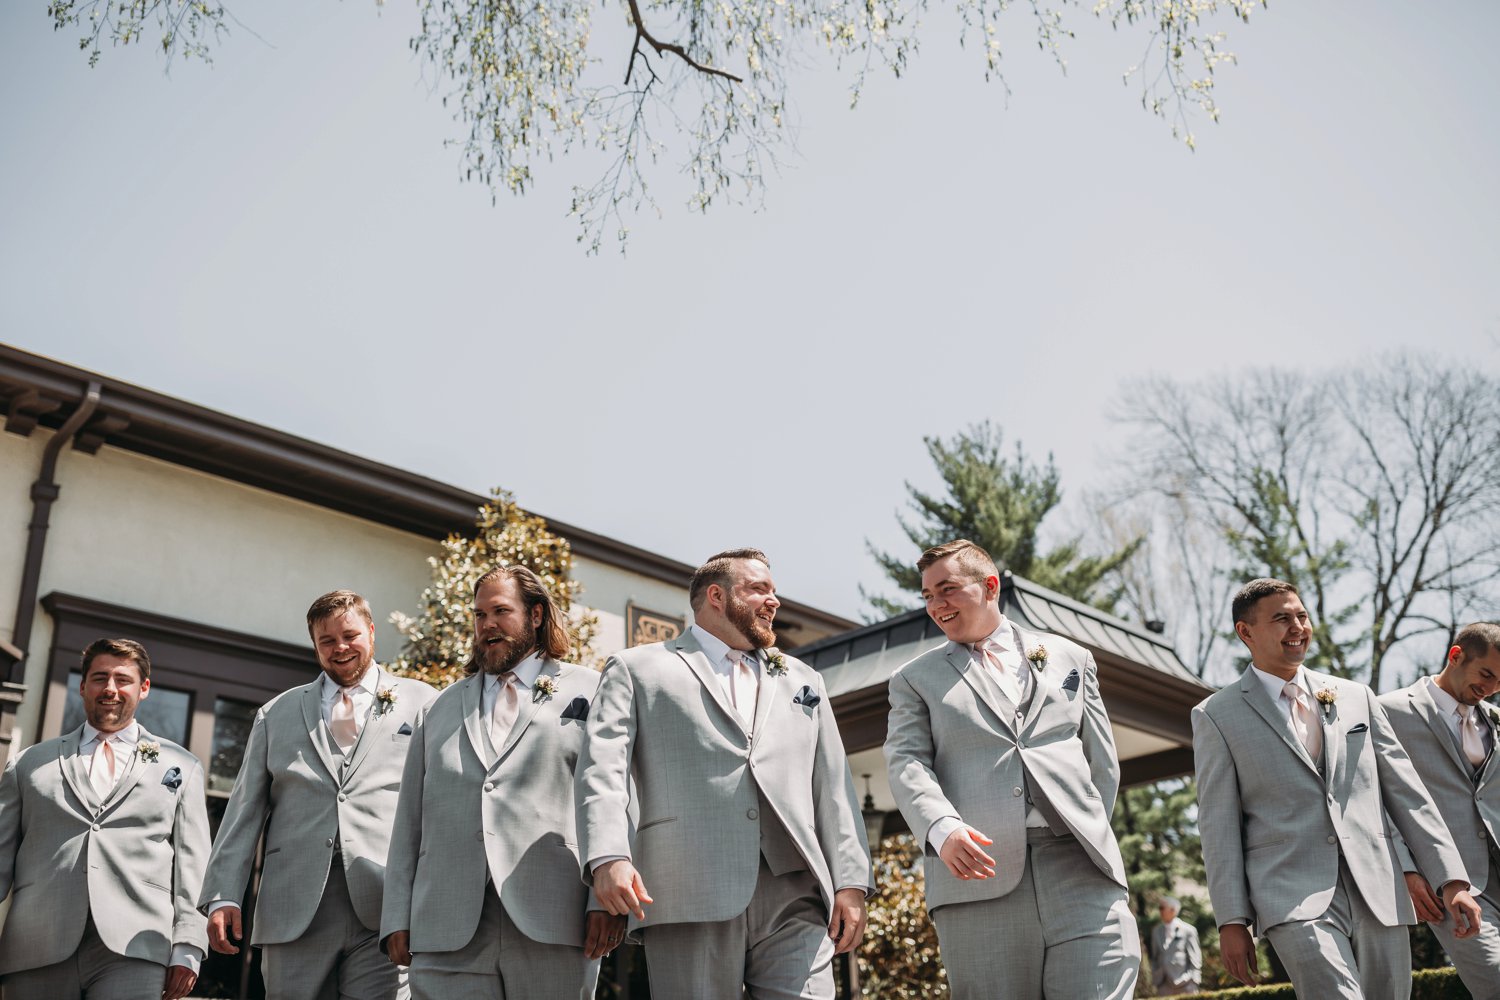  images by feliciathephotographer.com | destination wedding photographer | spring time | carriage club | exclusive | groomsmen | pre ceremony | details | grey suit | jos a bank | classic | light pink tie | 